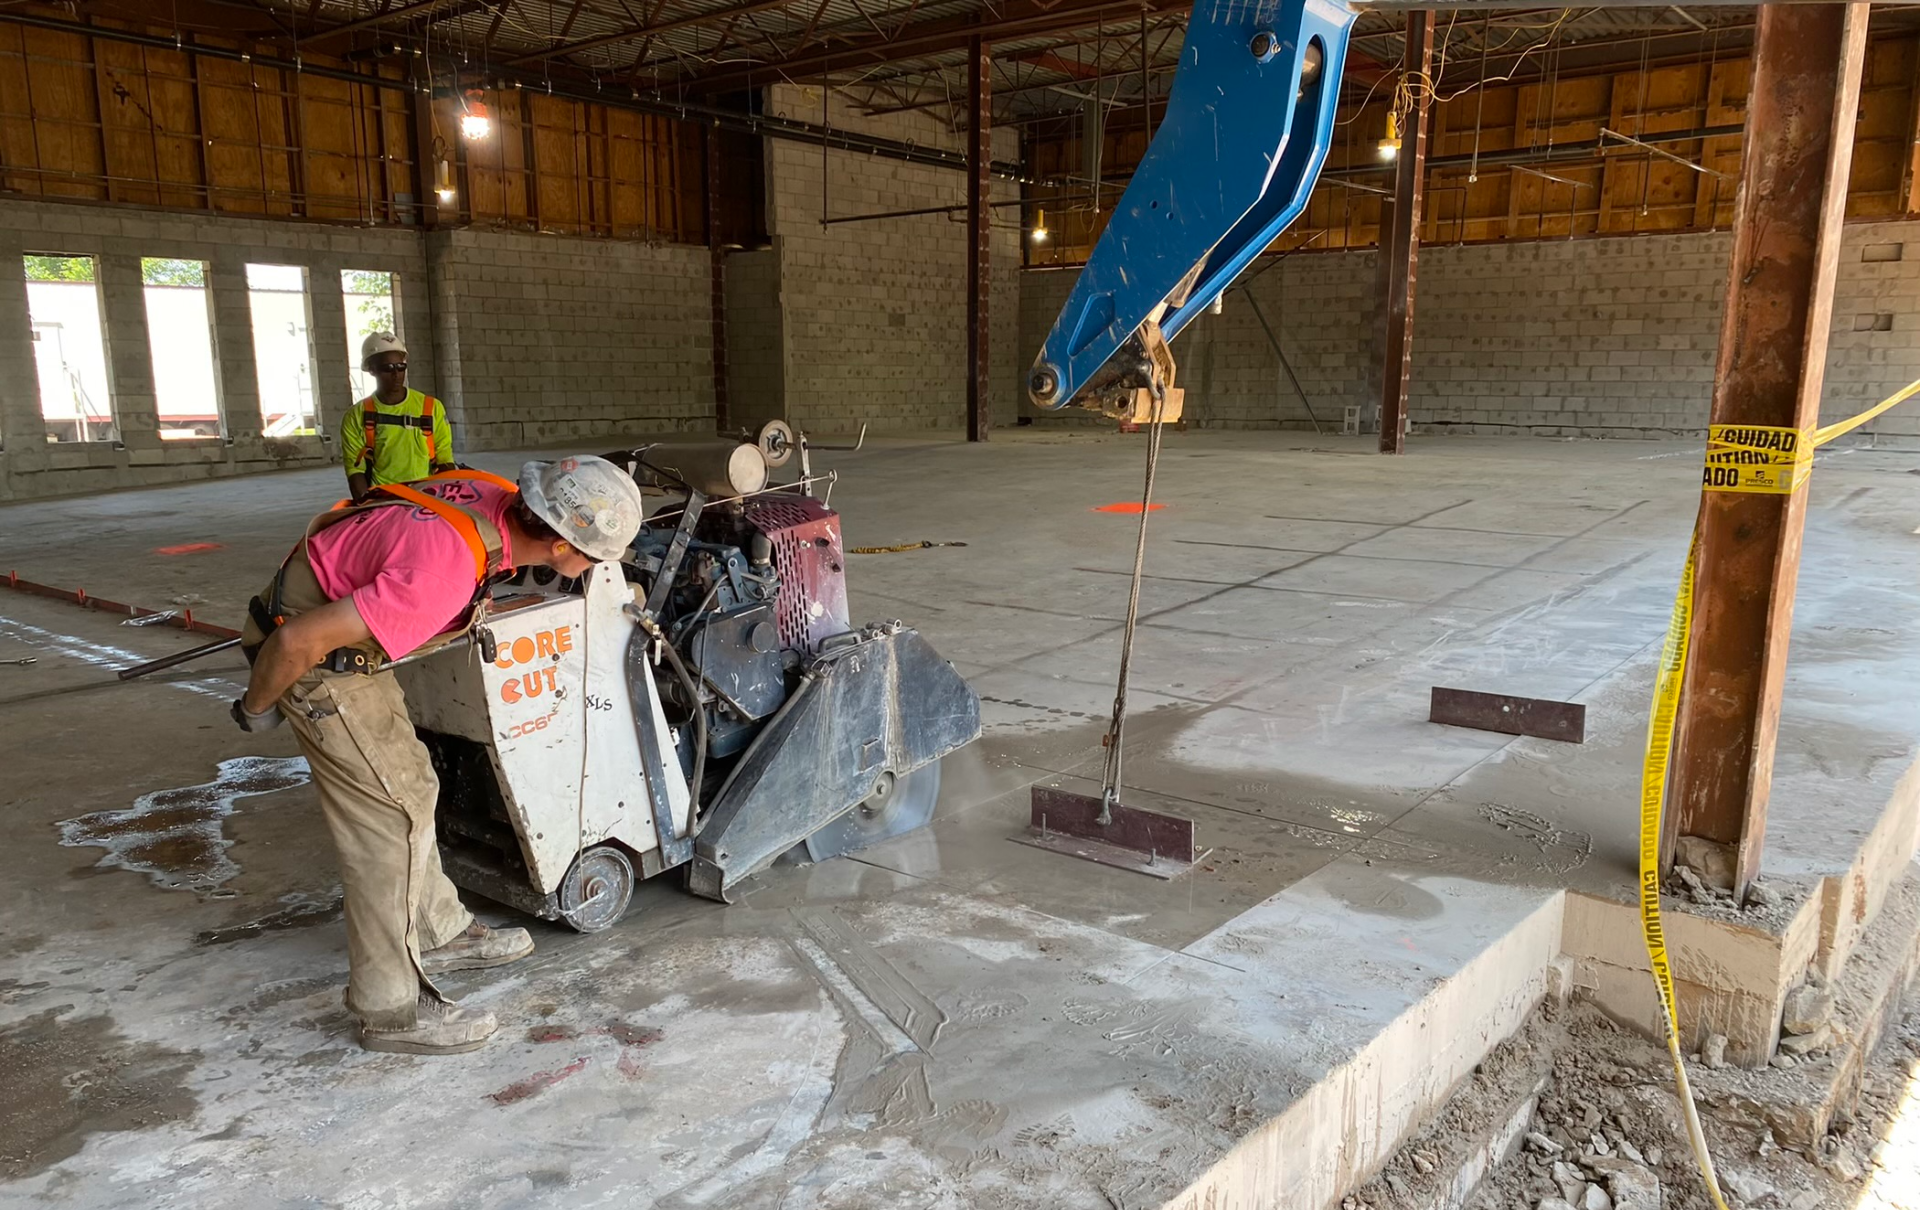 A man is standing next to a machine that is cutting concrete.